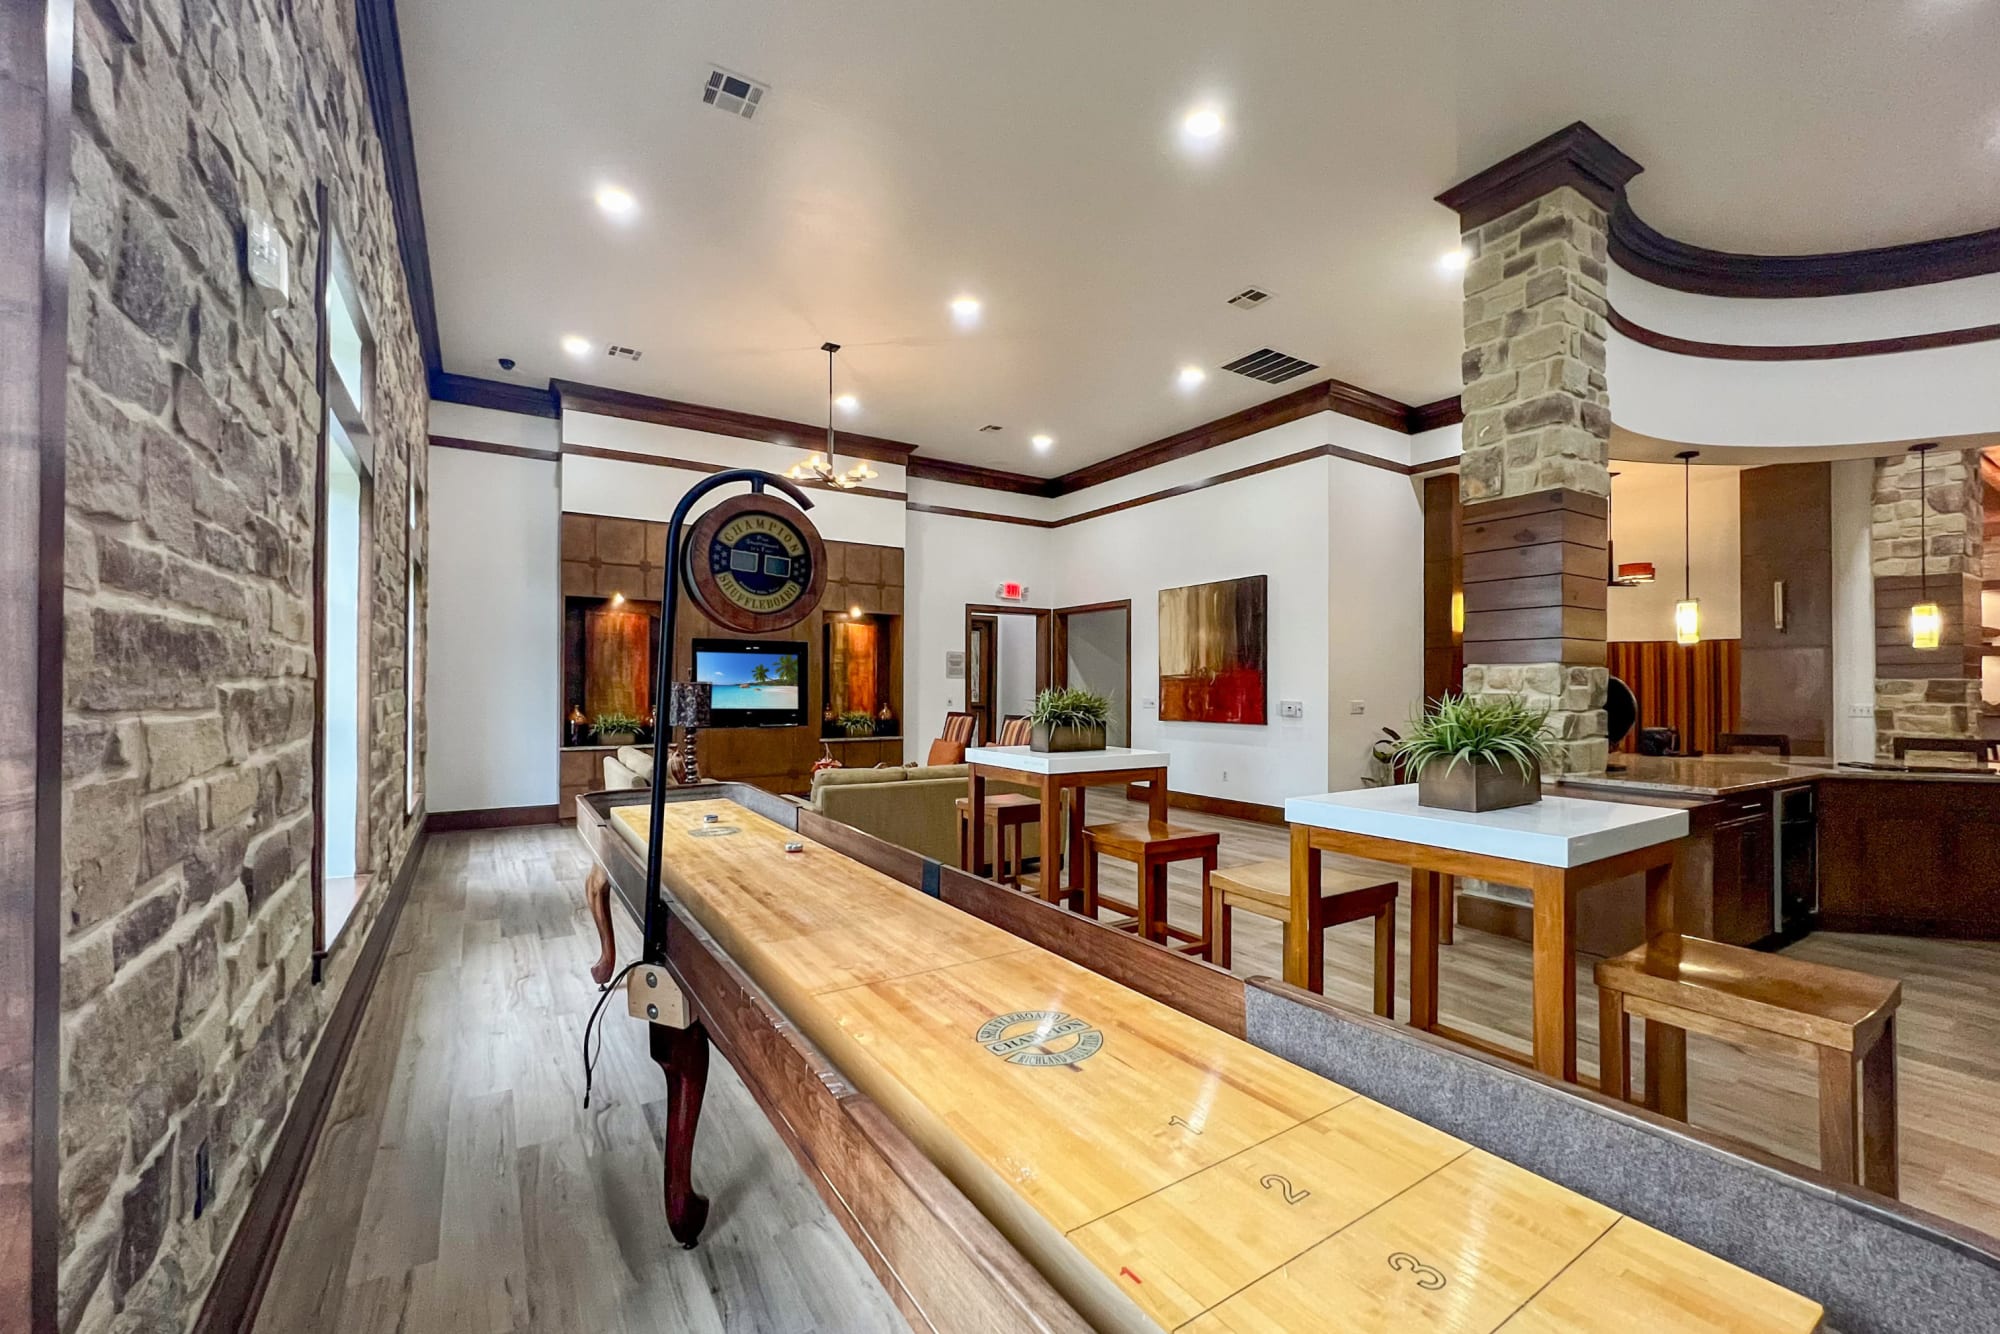 Shuffleboard in Community Room Lounge at Broadstone Grand Avenue in Pflugerville, Texas